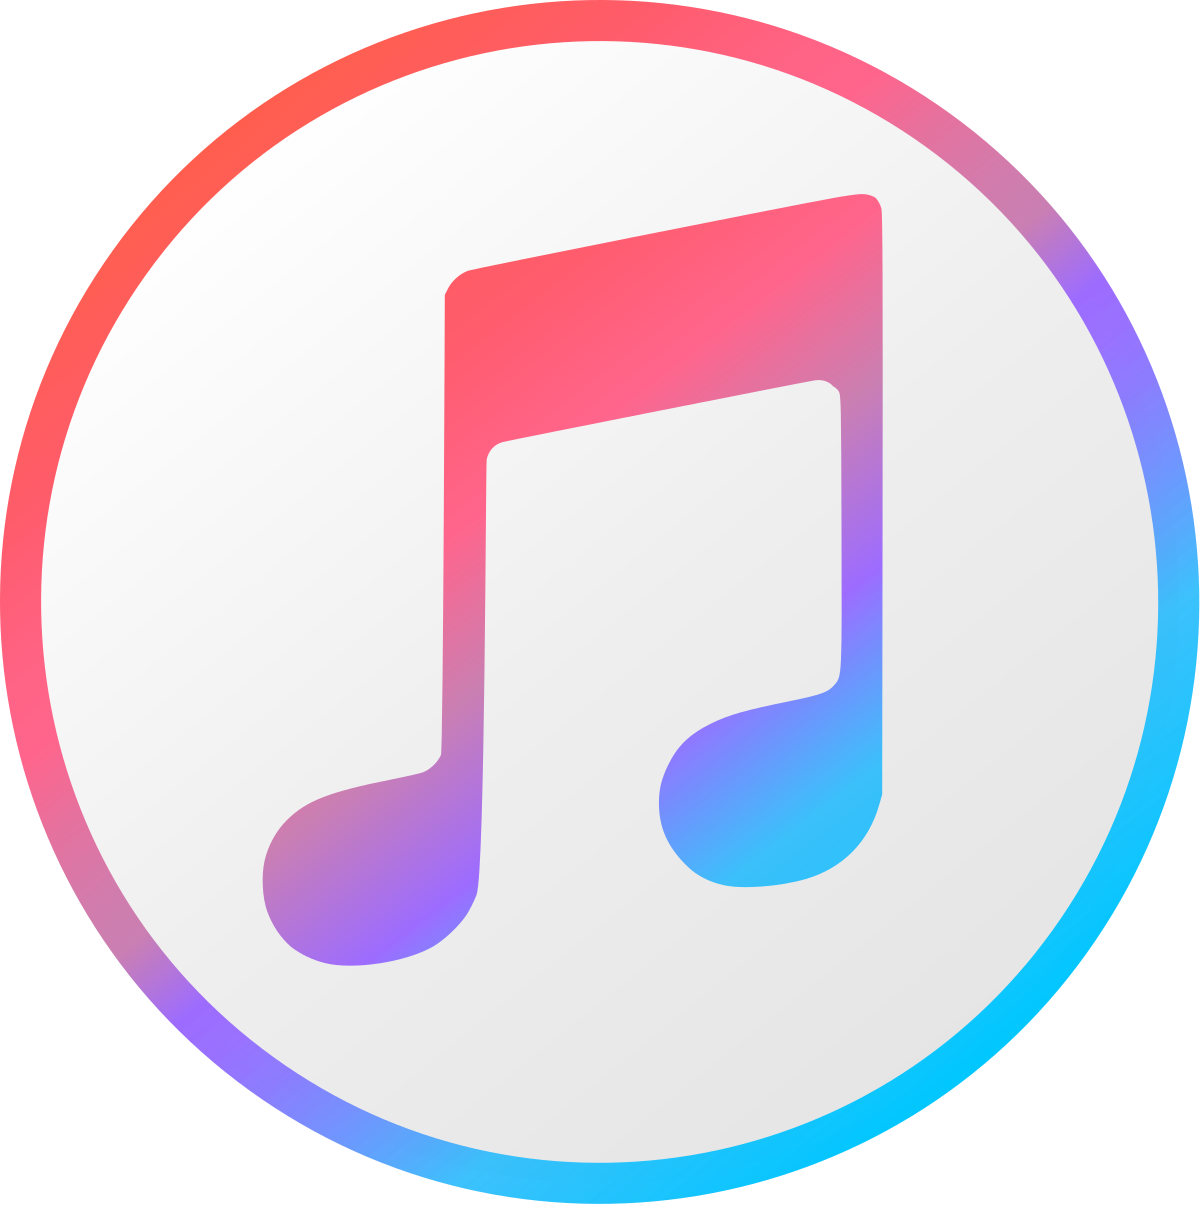 Itunes 10.1 download mac operating system